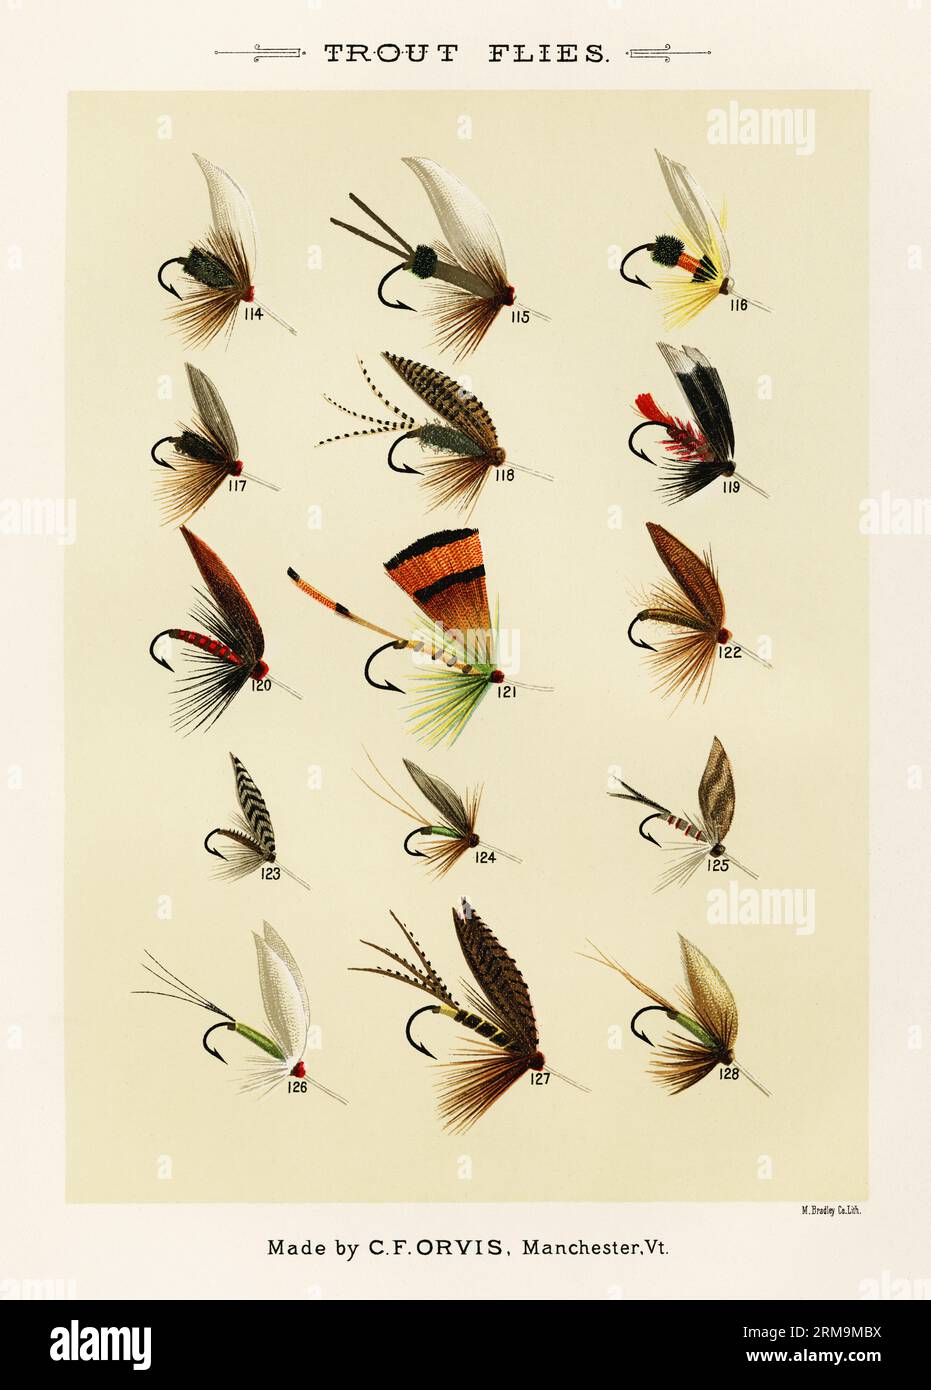 https://c8.alamy.com/comp/2RM9MBX/vintage-illustration-of-fly-fishing-hooks-assorted-barbed-fly-hooks-with-different-sizes-and-eyelets-for-artificial-fly-patterns-in-fly-fishing-ca-2RM9MBX.jpg